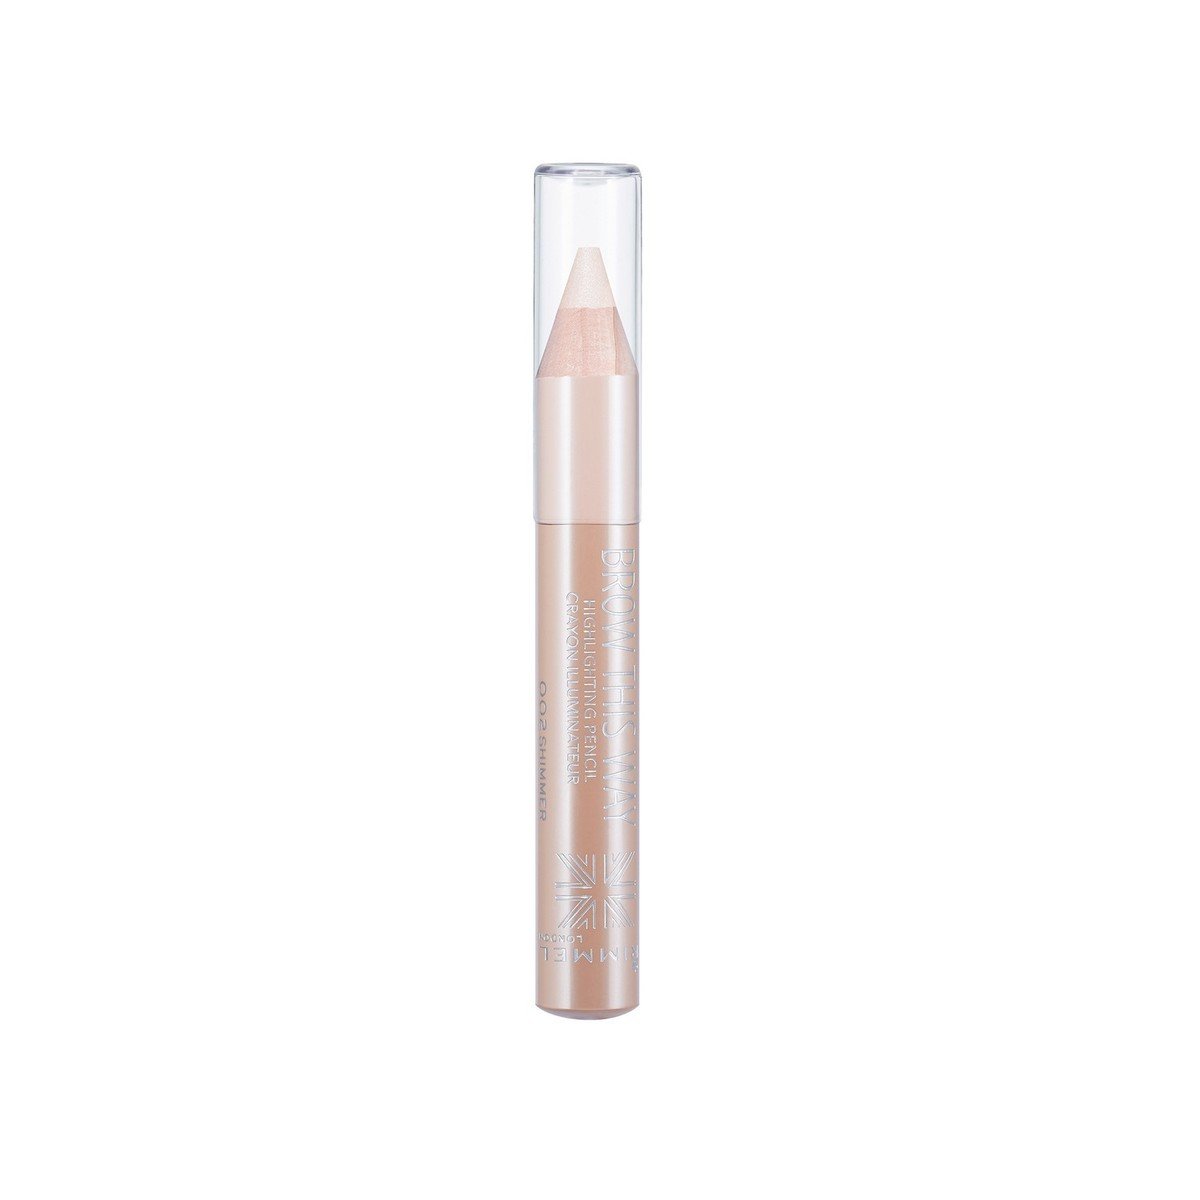 Rimmel London Brow This Way Highlighting Pencil Gold Shimmer 1pc